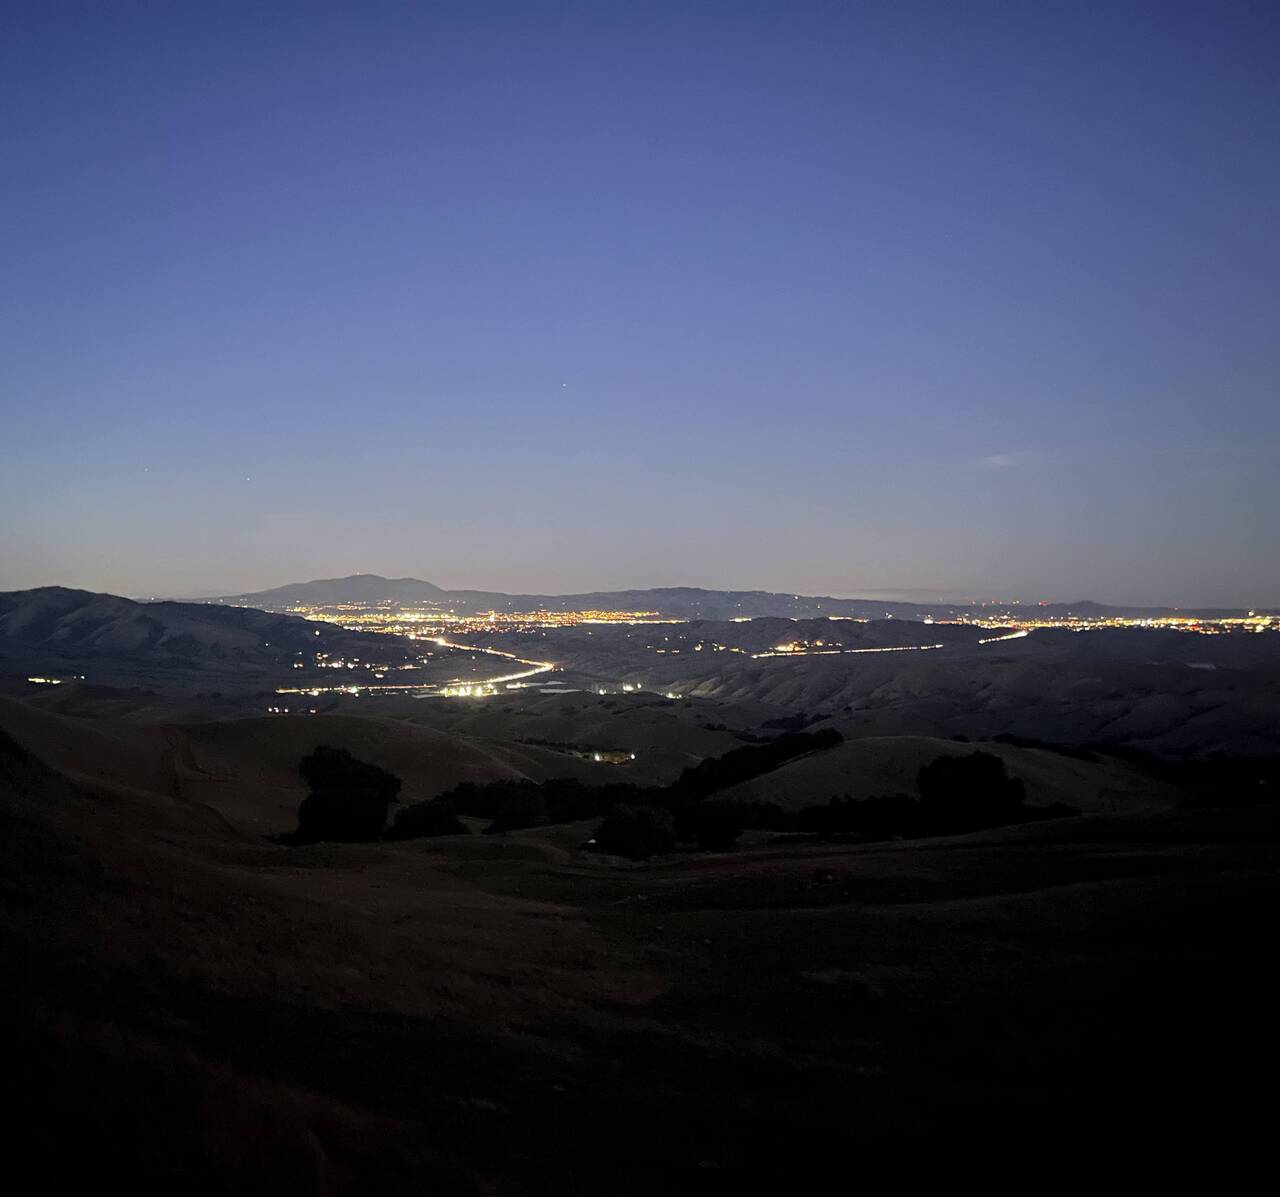 Near Misson Peak, looking toward Pleasanton, the starting point of Livermore is now only a glow on the horizon